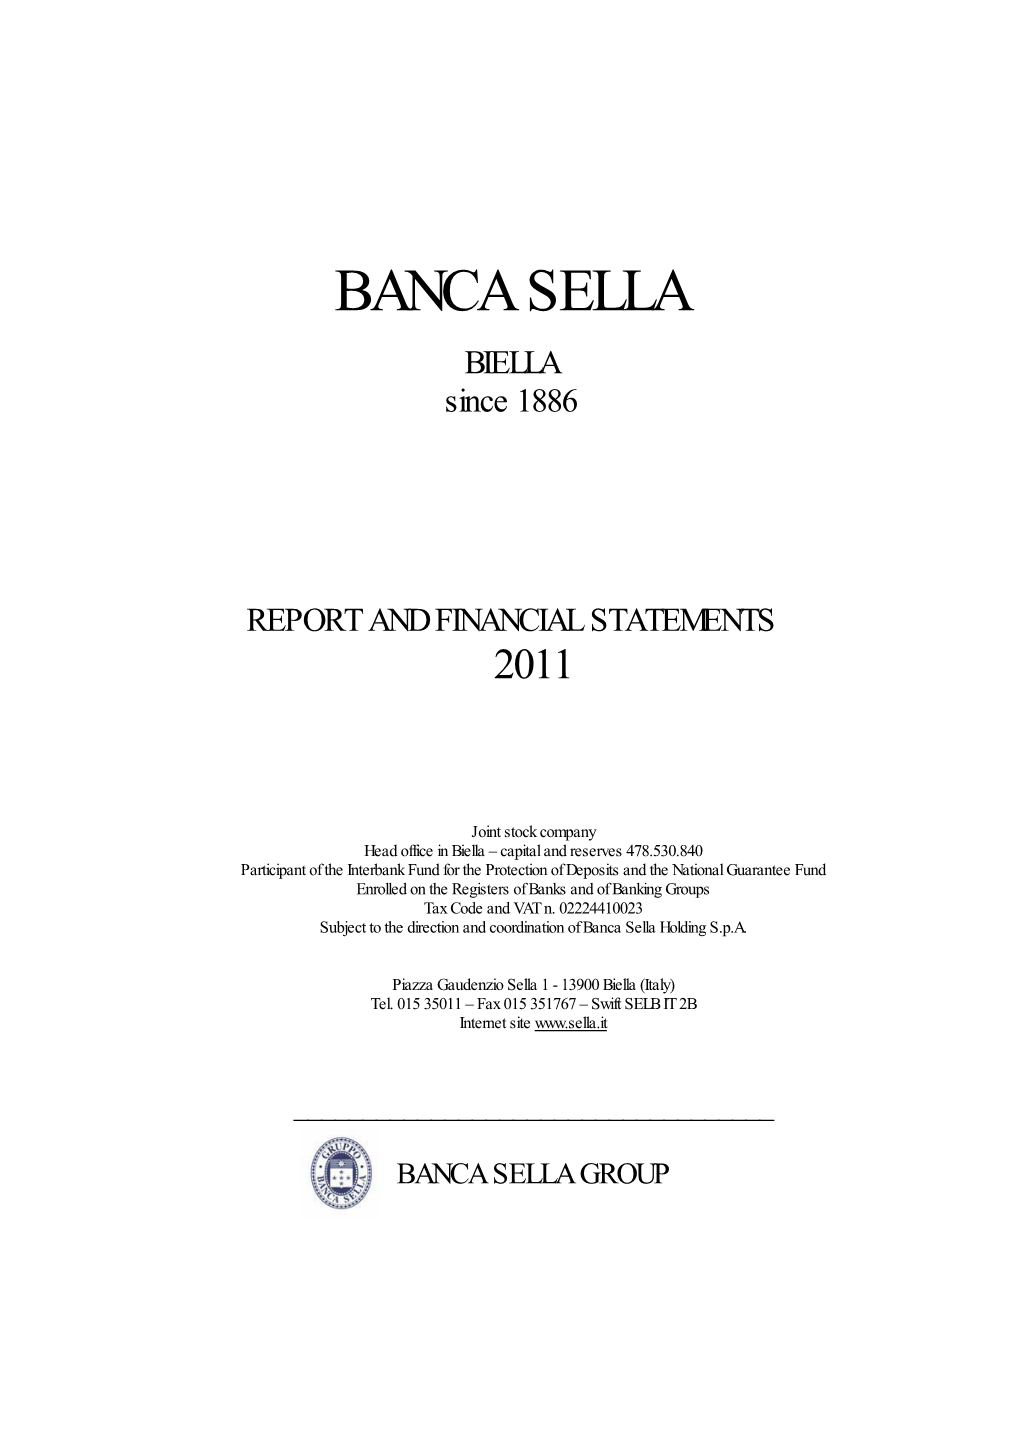 BIELLA Since 1886 REPORT and FINANCIAL STATEMENTS